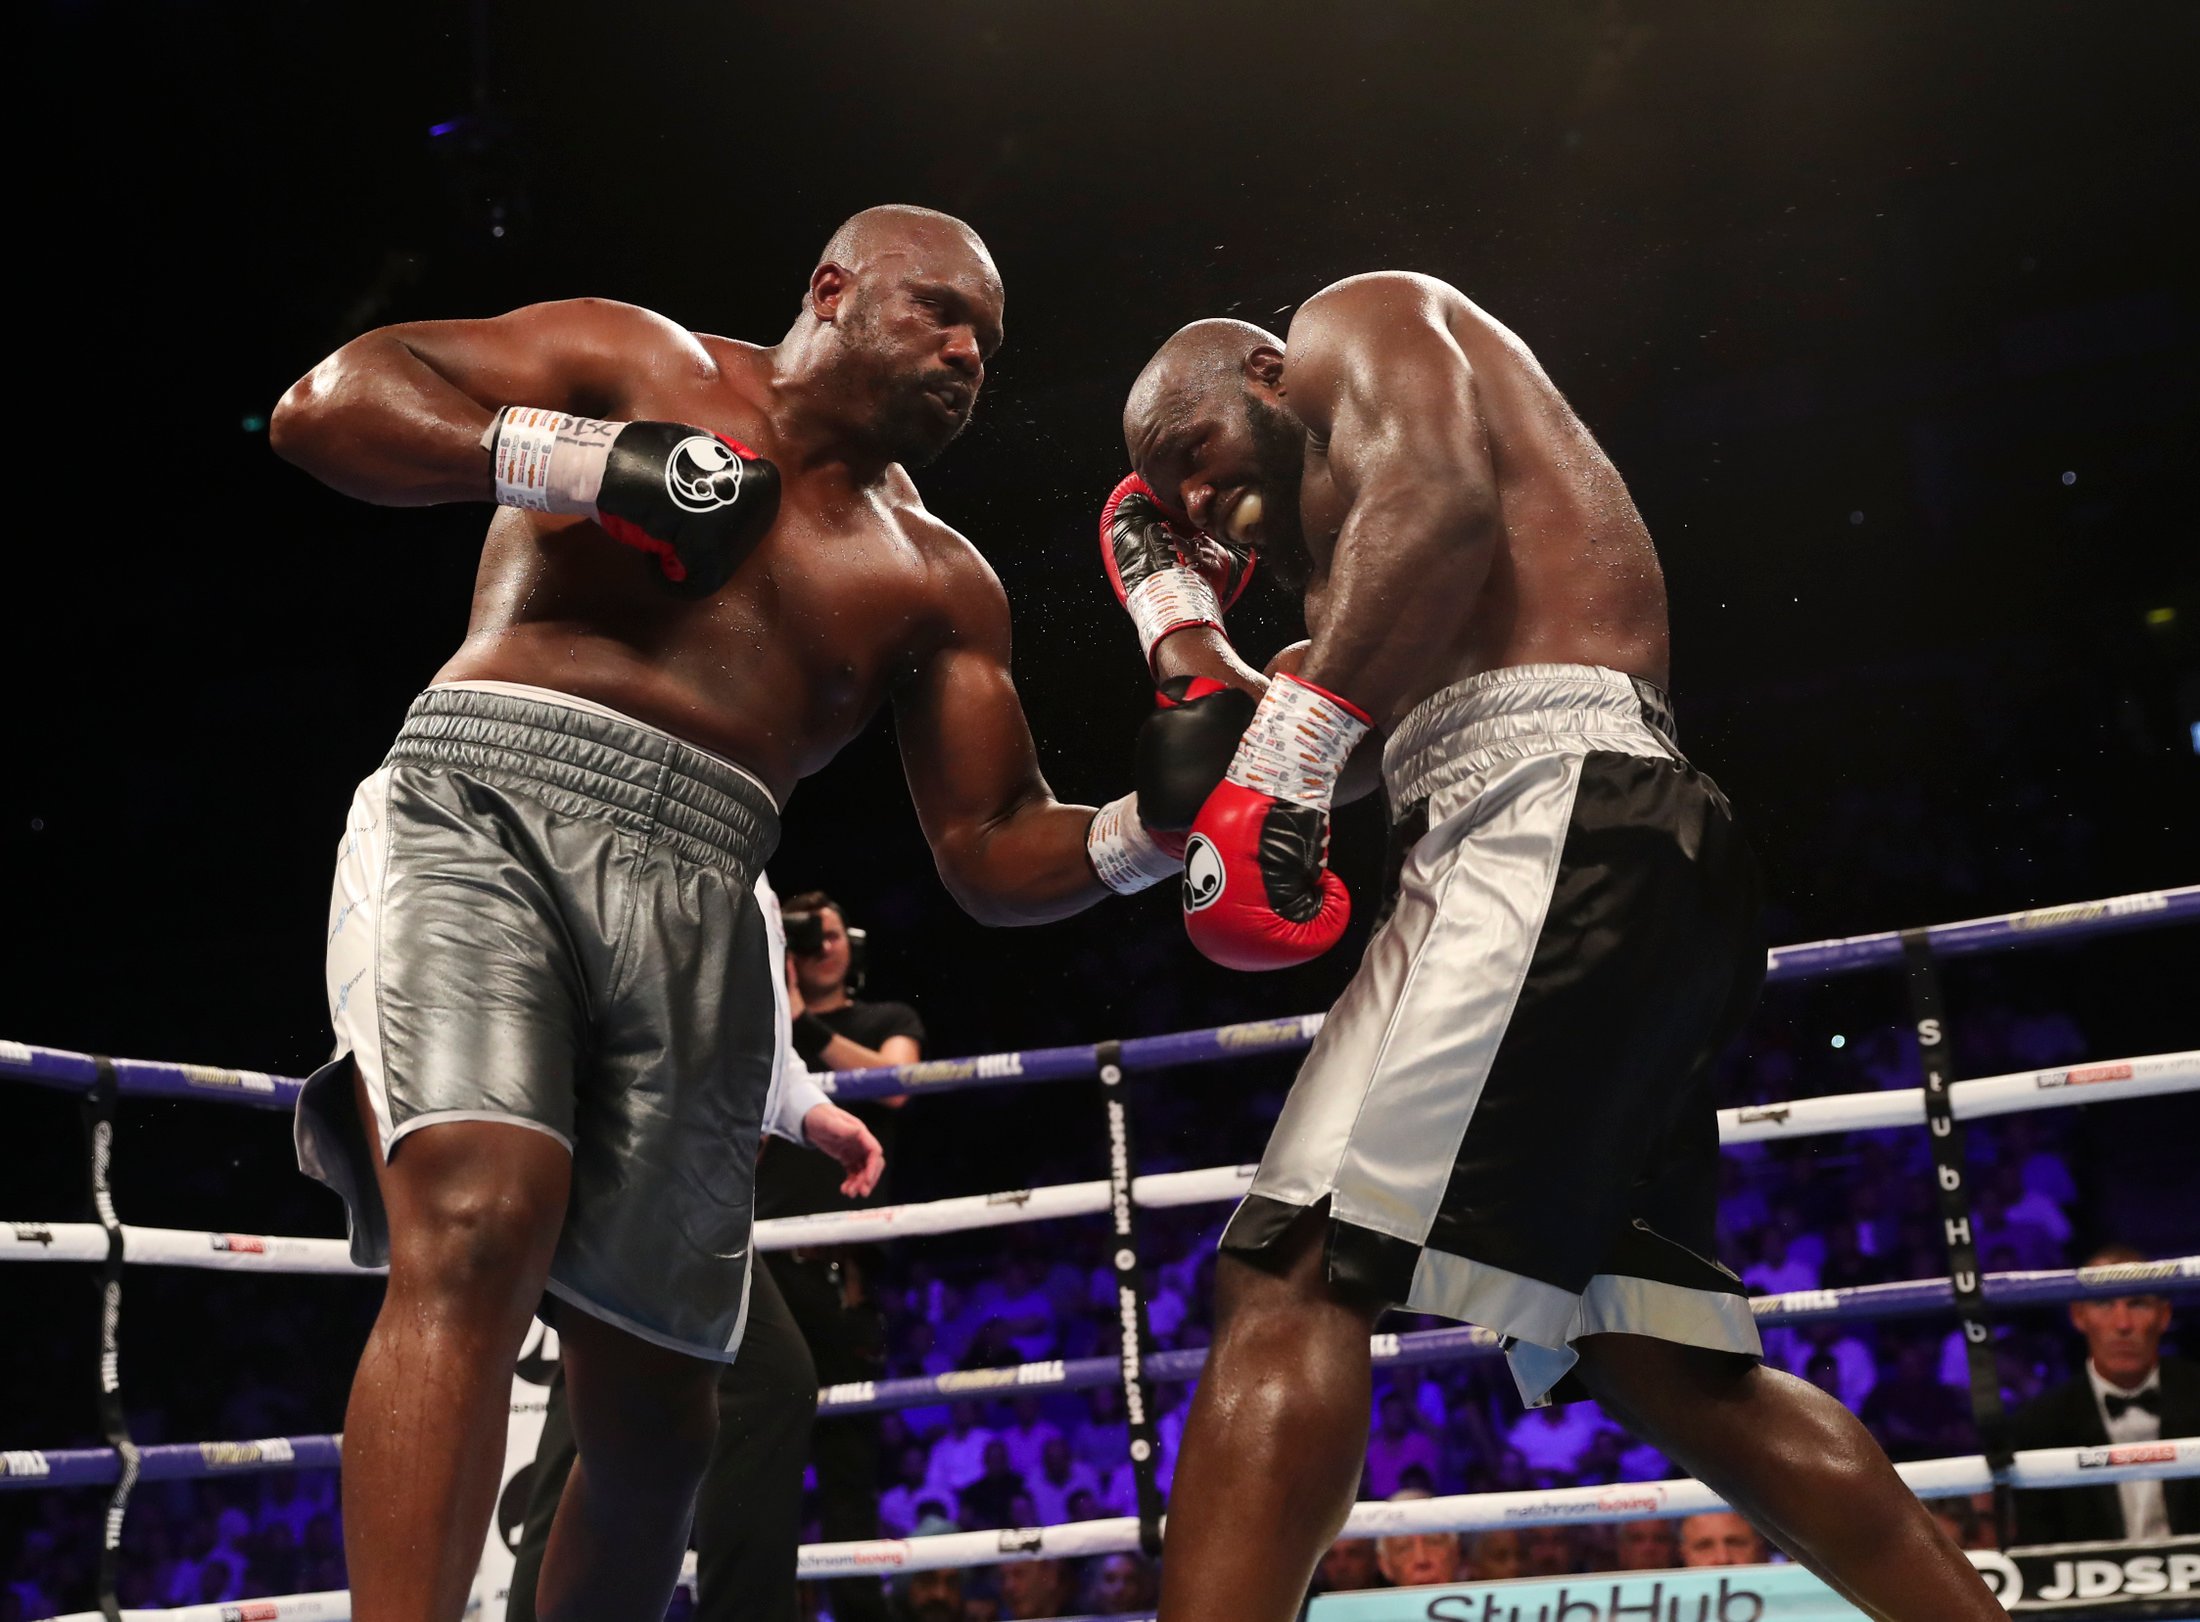 Heavyweight Dereck Chisora (left) attacks Carlos Takam. Photo by Lawrence Lustig